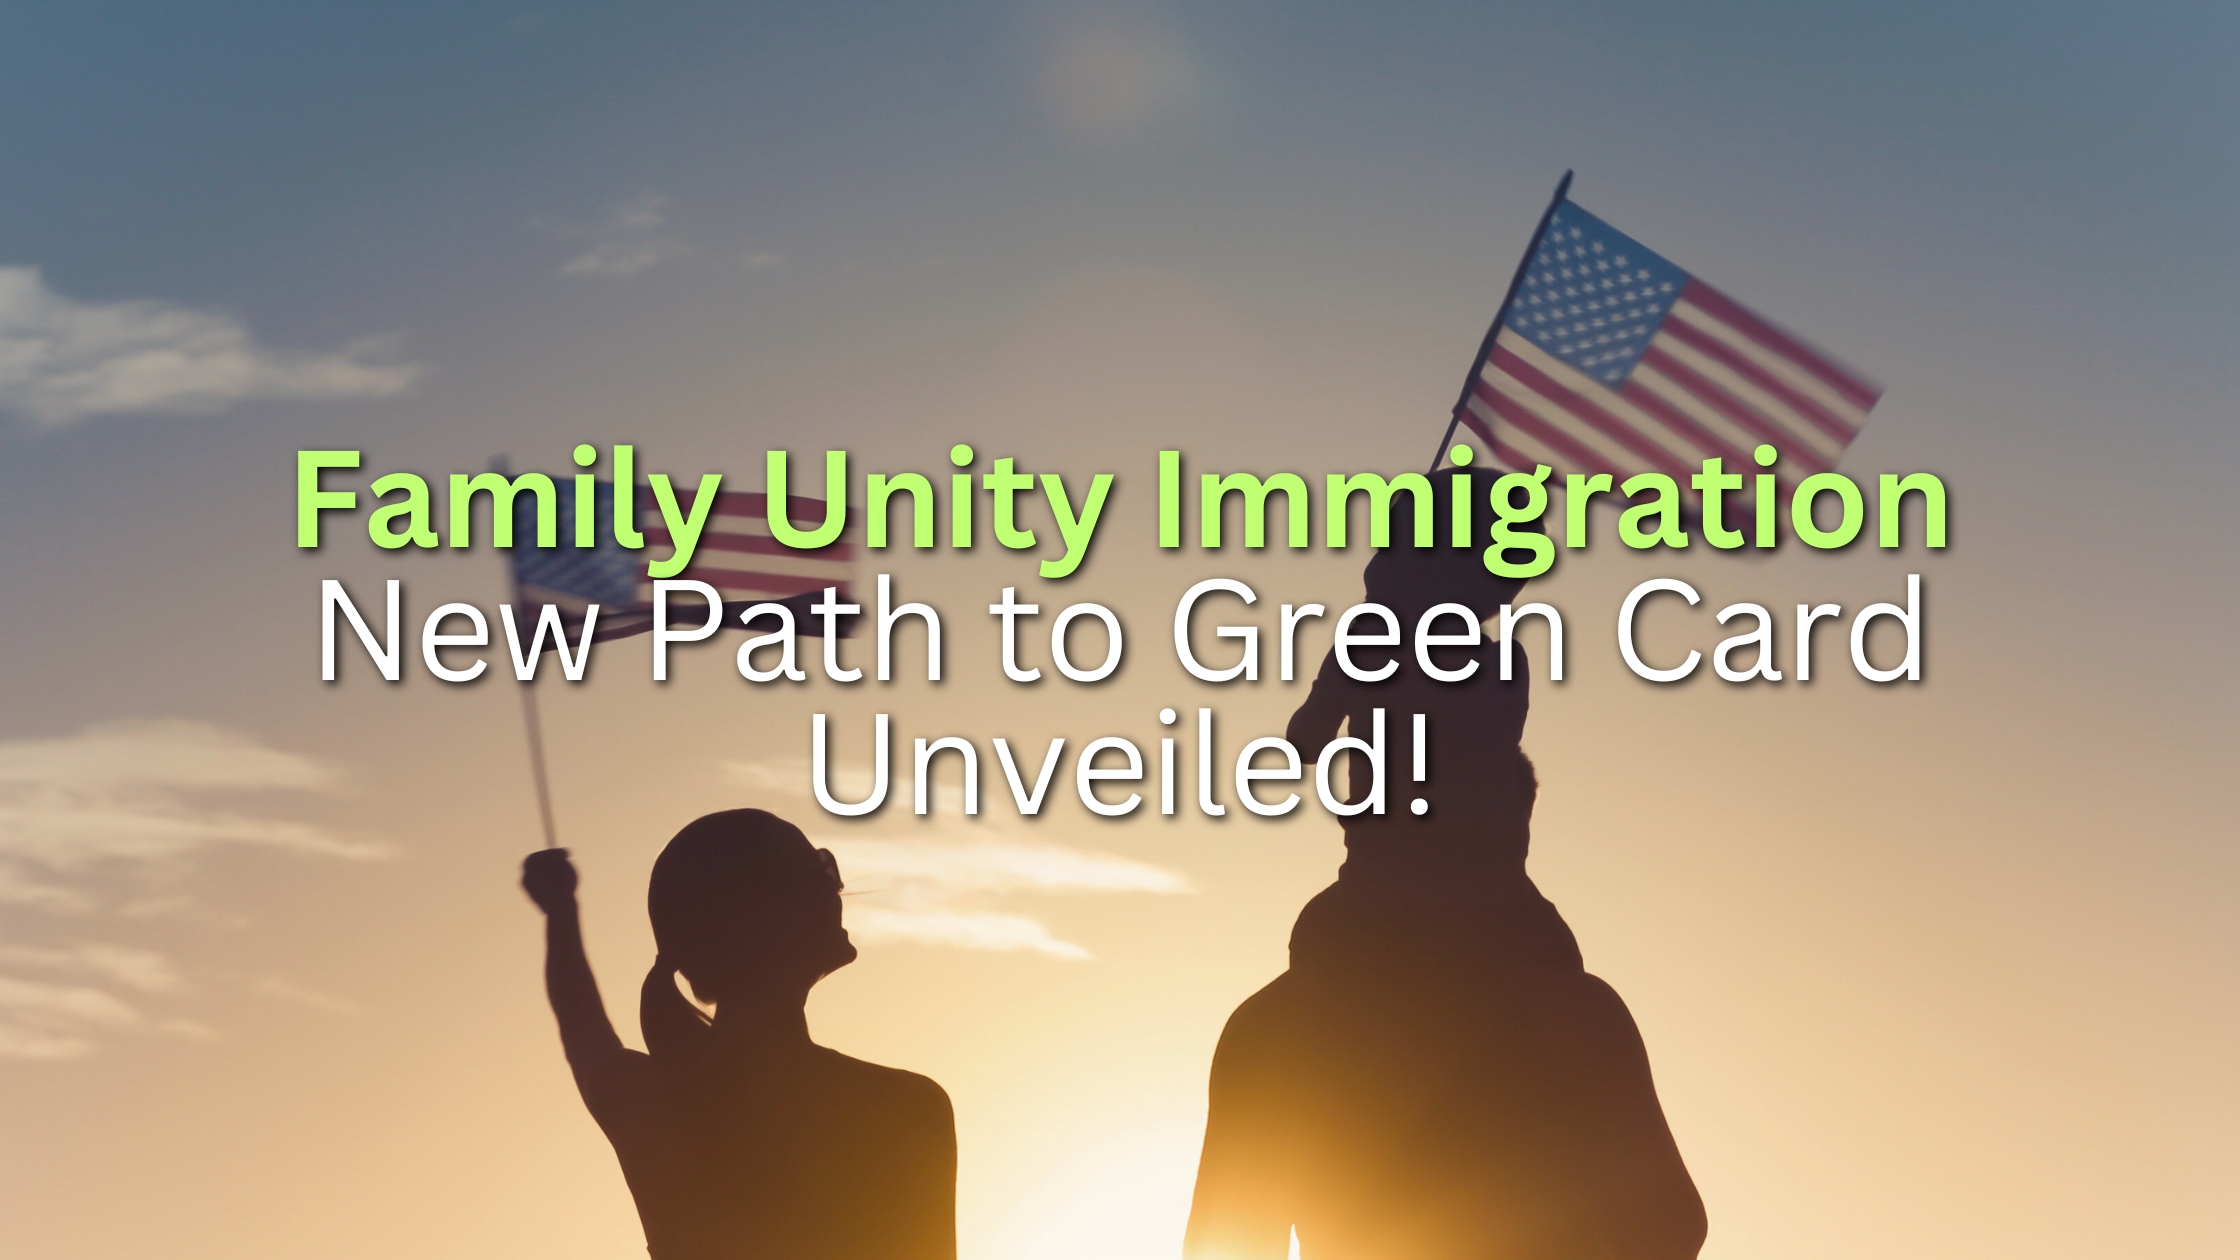 Blog Title Header for Family Unity Immigration: New Path to Green Card Unveiled!